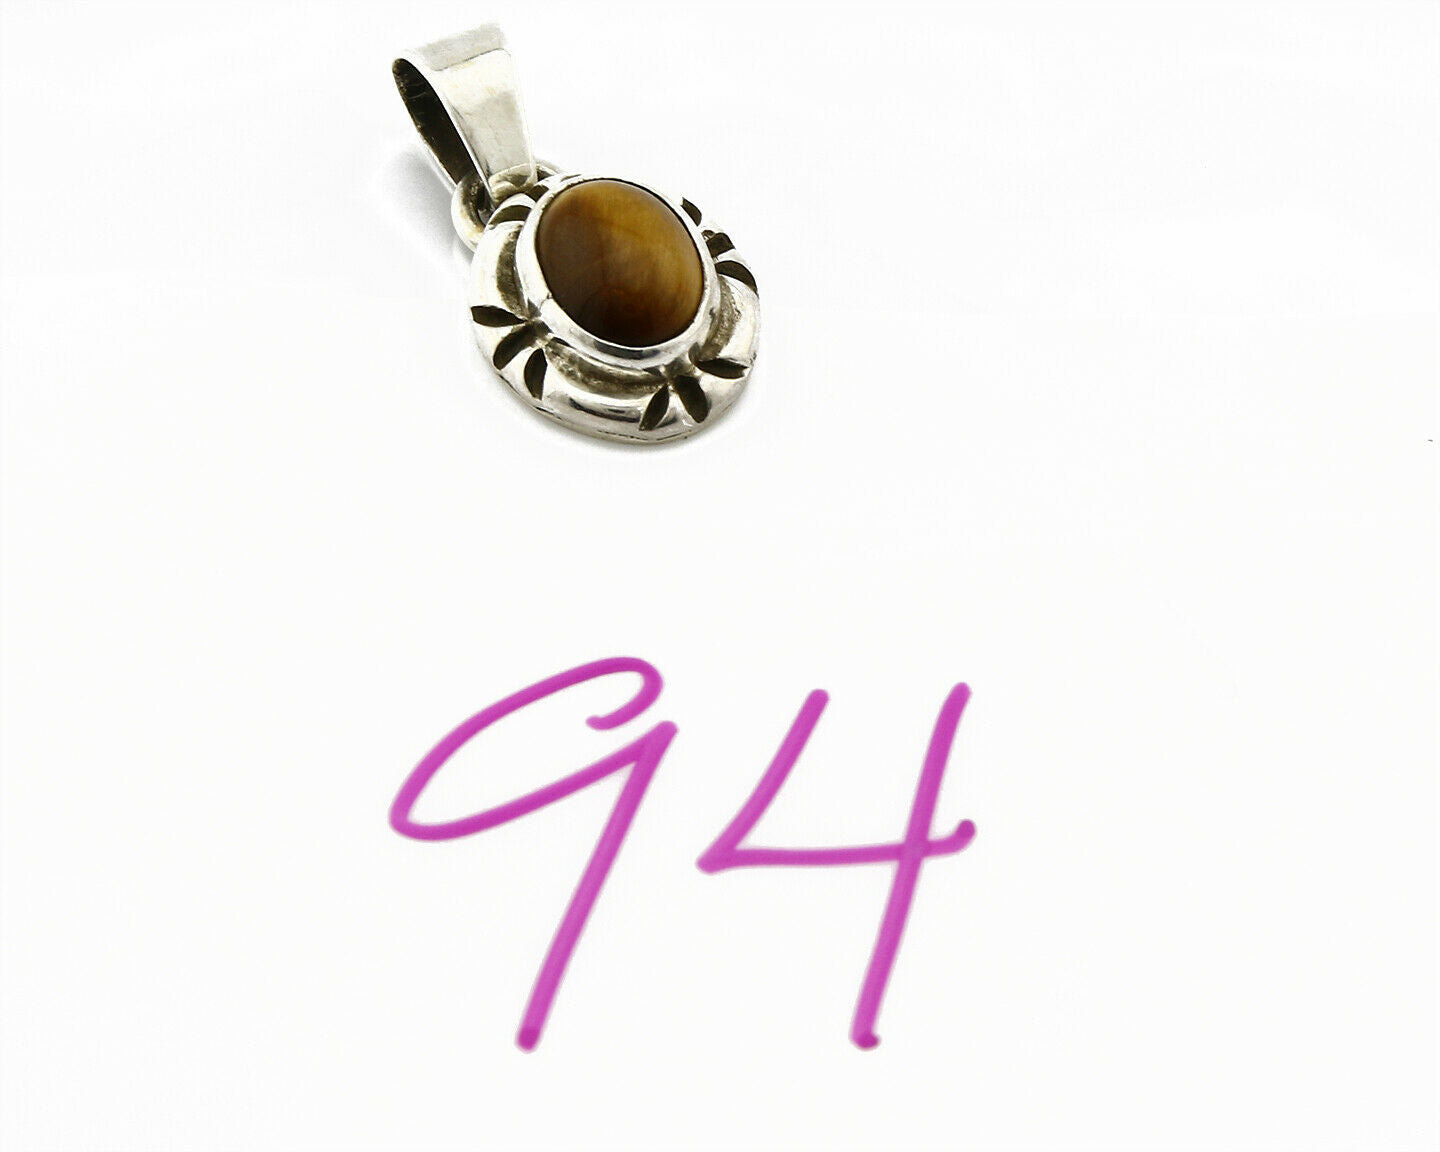 Navajo Hand Stamped Natural Mined Tiger's Eye in .925 SOLID Silver Pendant